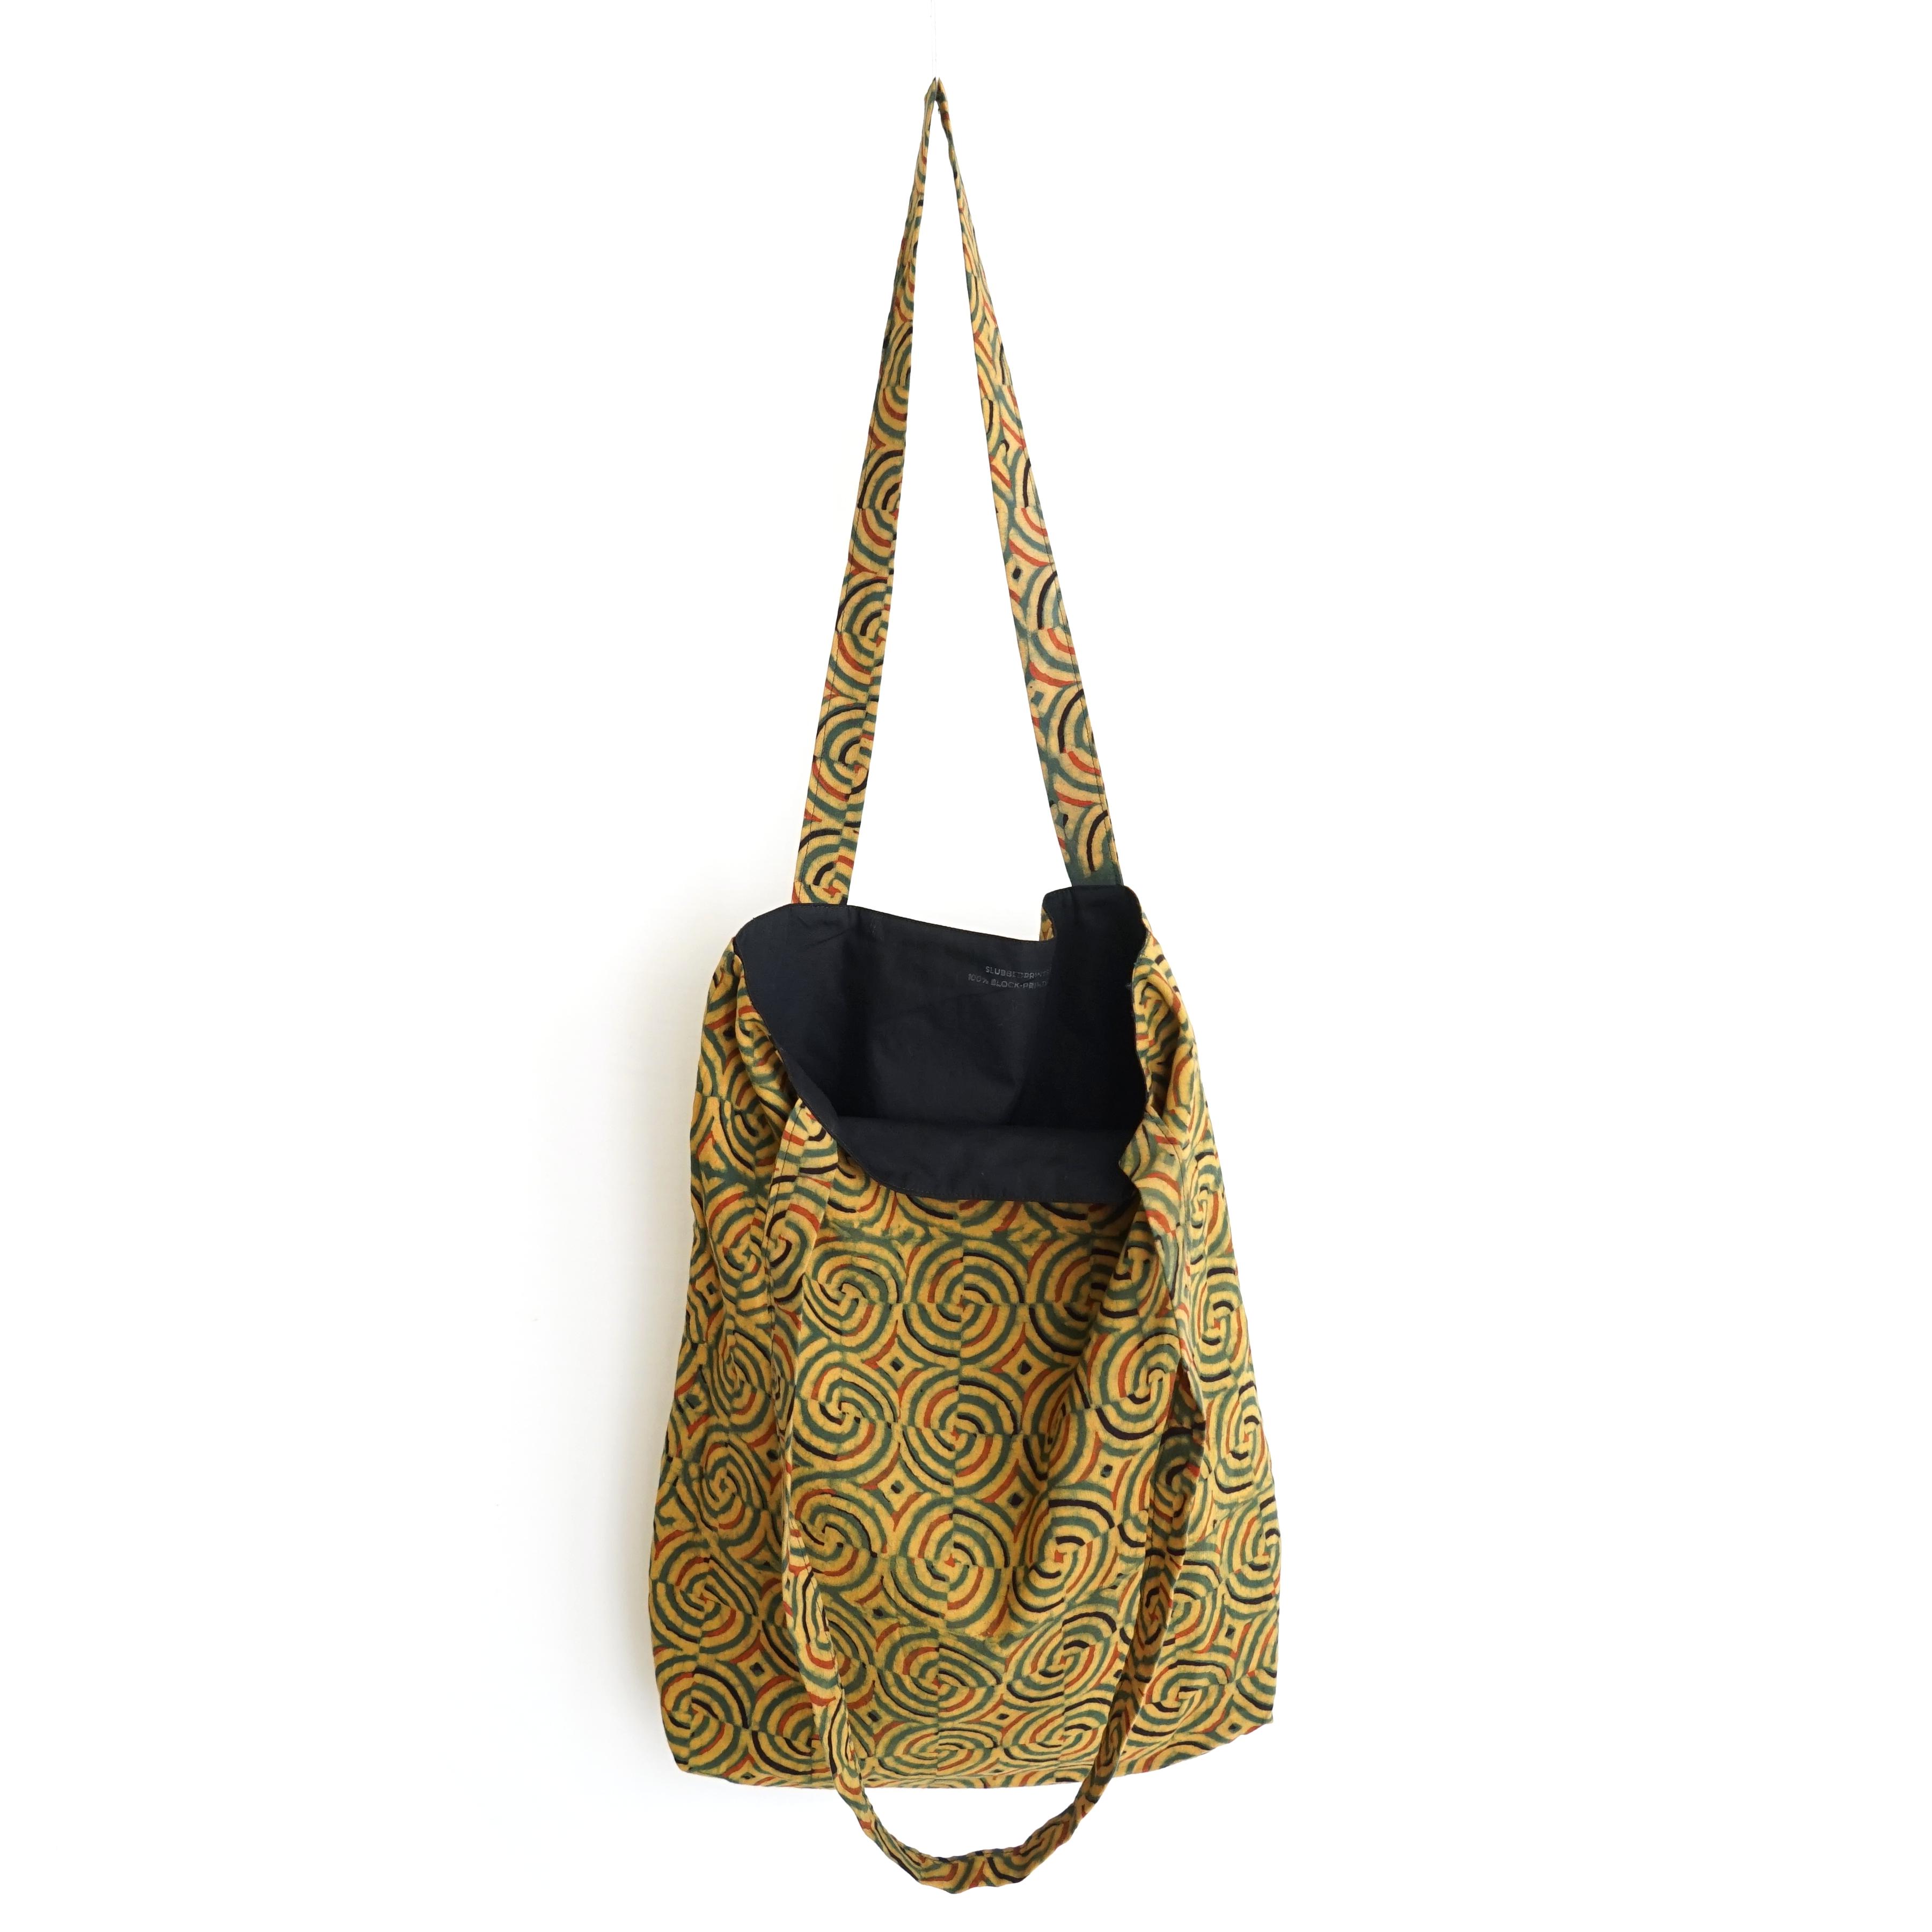 block printed cotton tote bag, natural dye, yellow, green red black spiral design, lined with black cotton, open